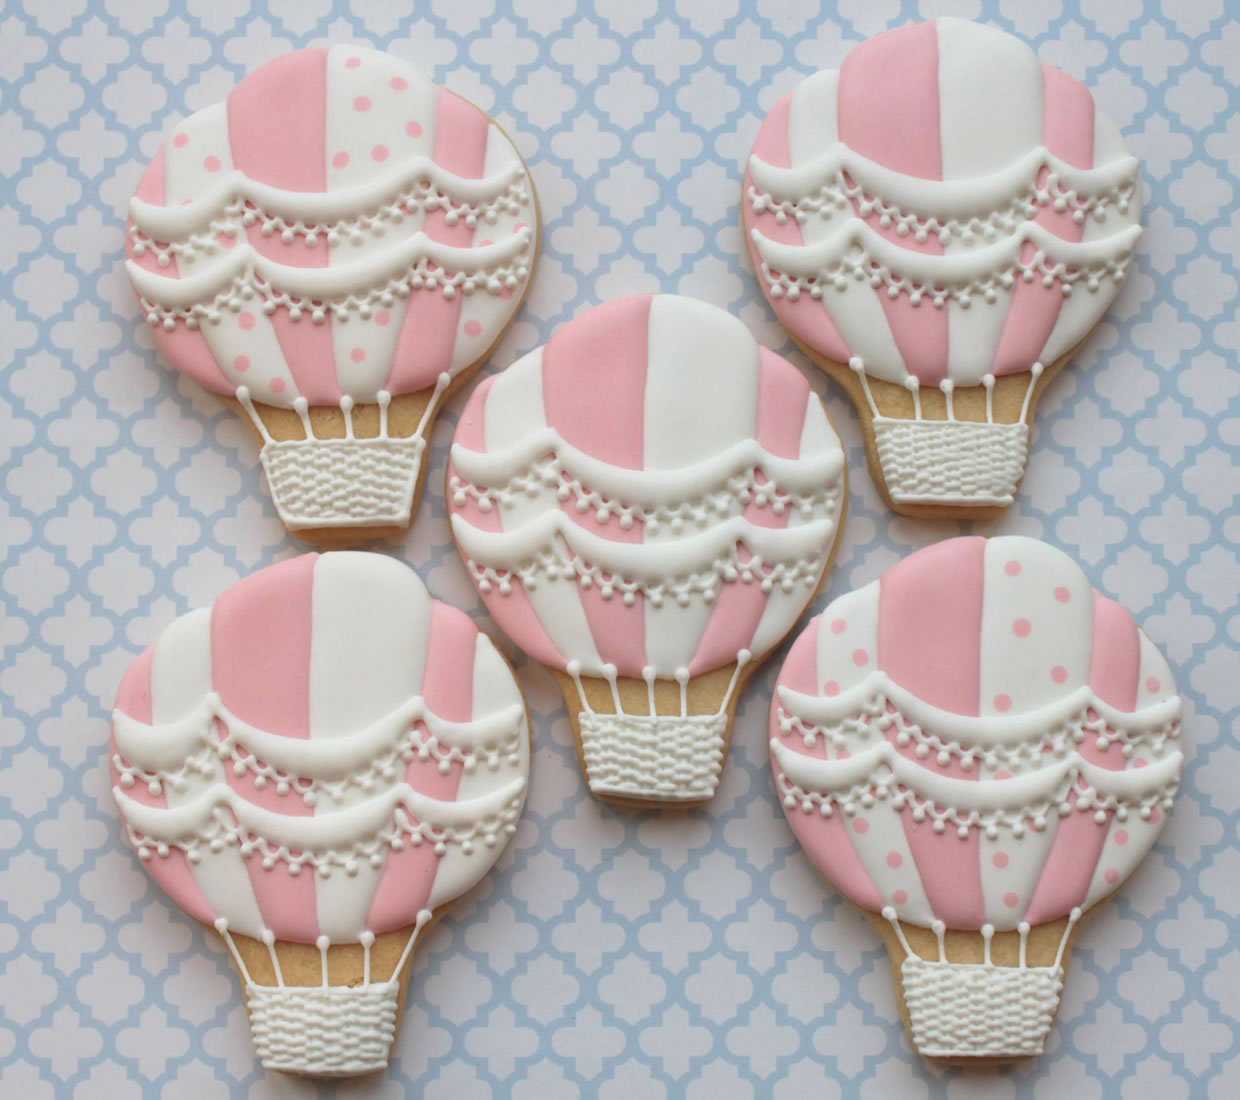 Hot Air Balloons Miss Biscuit